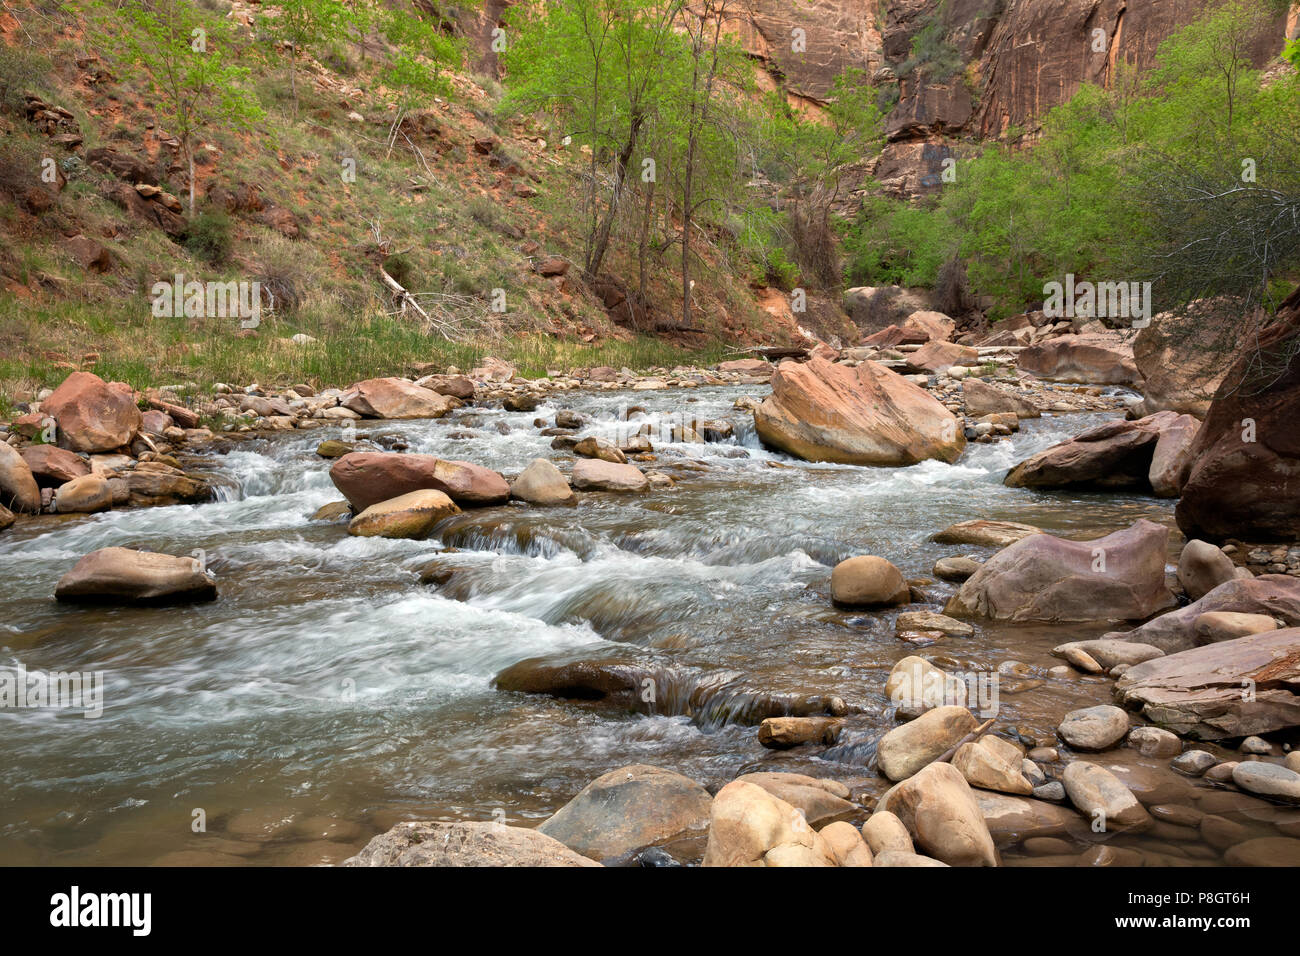 UT00427-00...UTAH - The North Fork Virgin River from the Riverside Walk trail in Zion National Park. Stock Photo